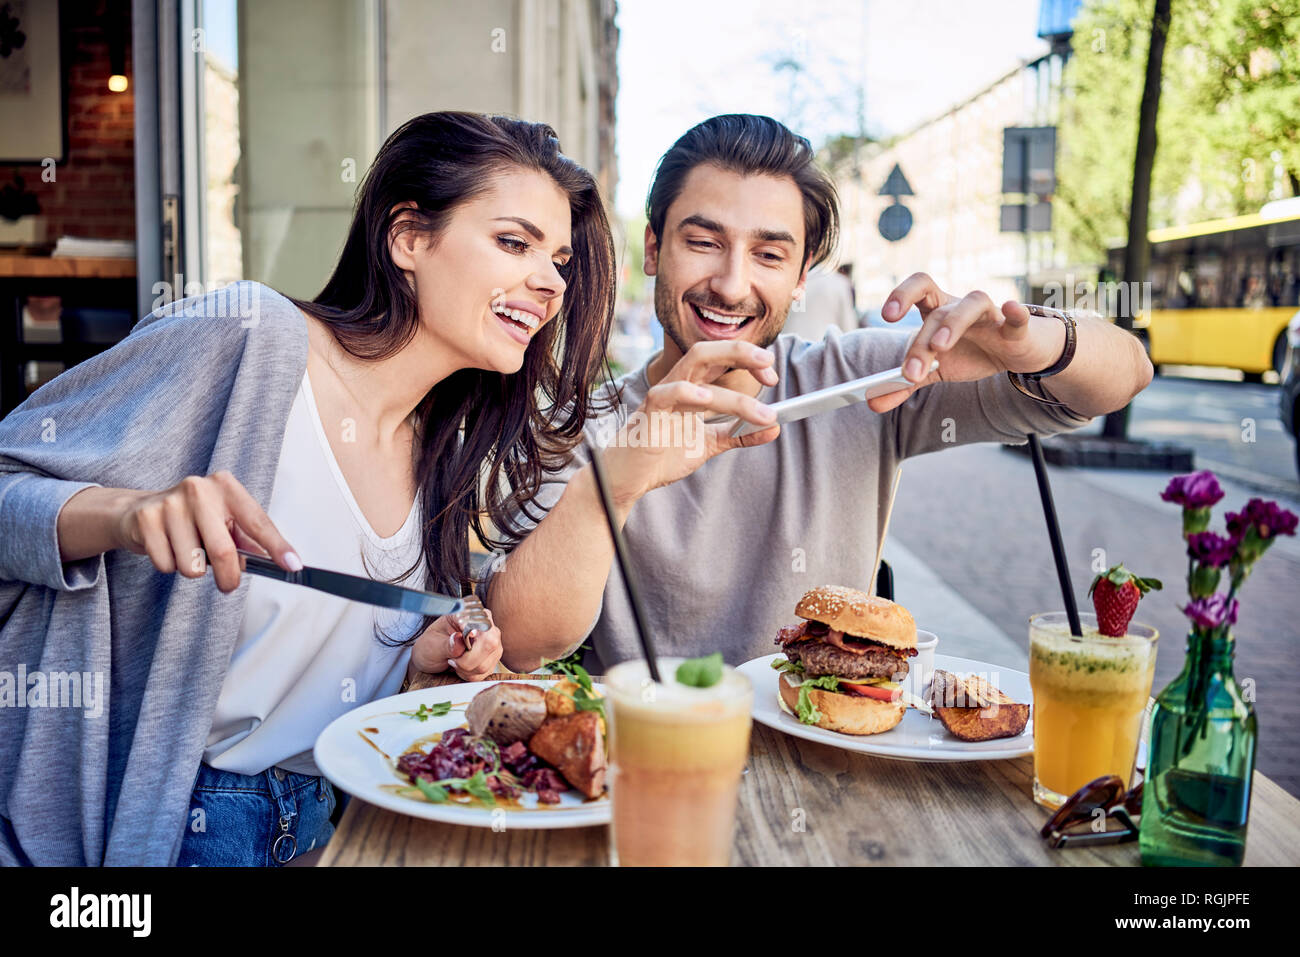 Happy young couple taking photo of food at outdoors restaurant Stock Photo